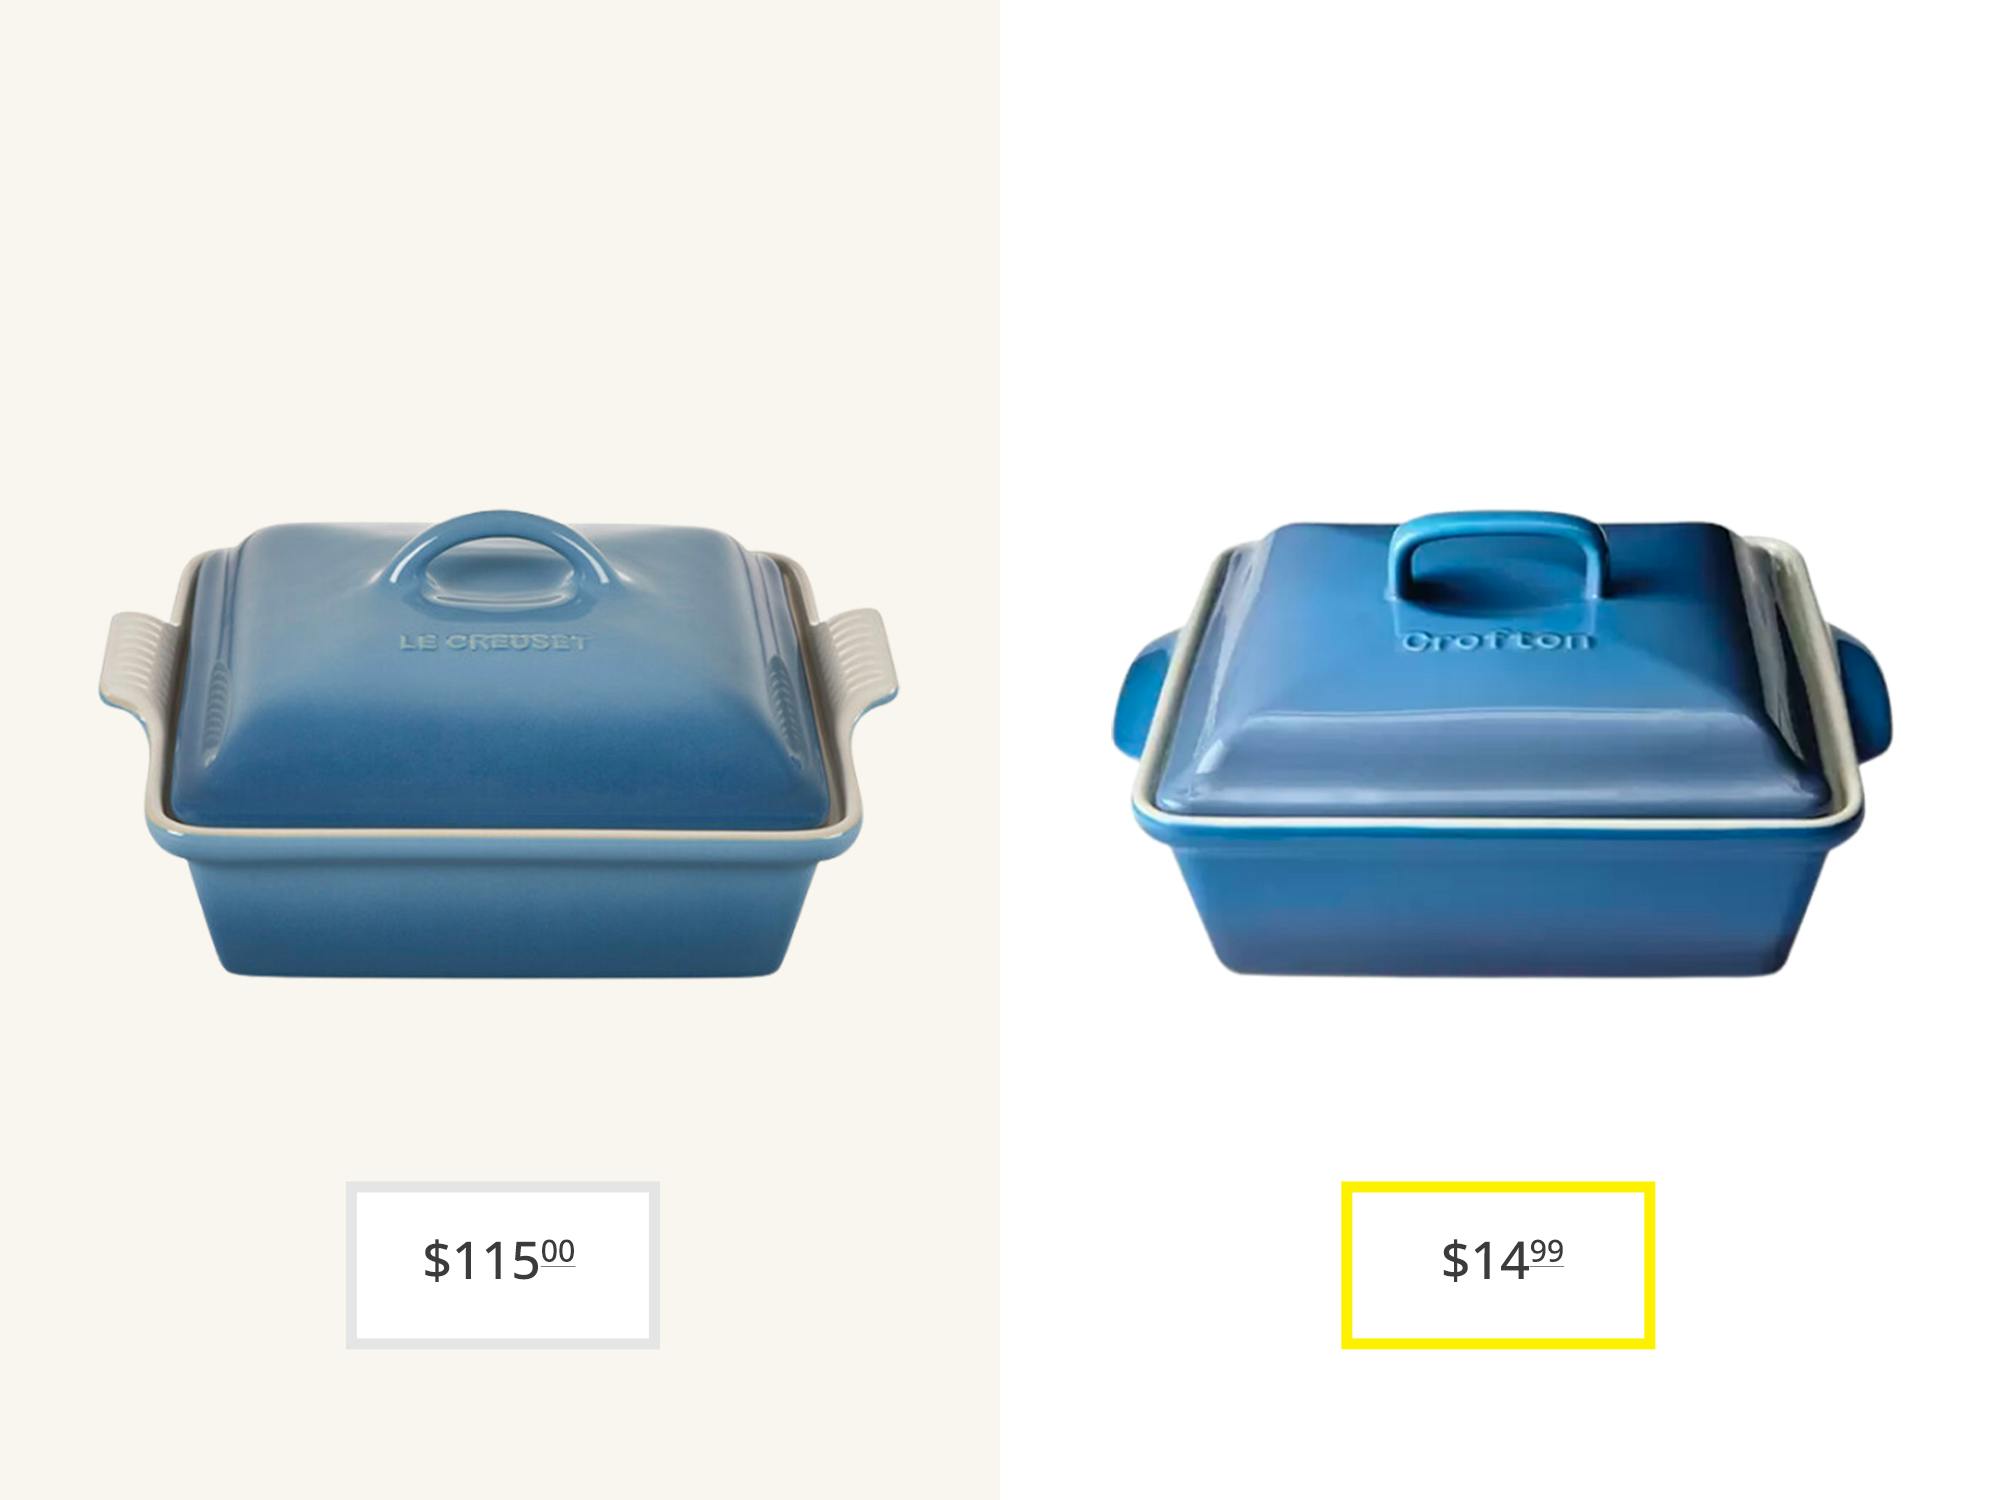 A Le Creuset baking dish compared to a Crofton Stoneware Baking Dish from Aldi